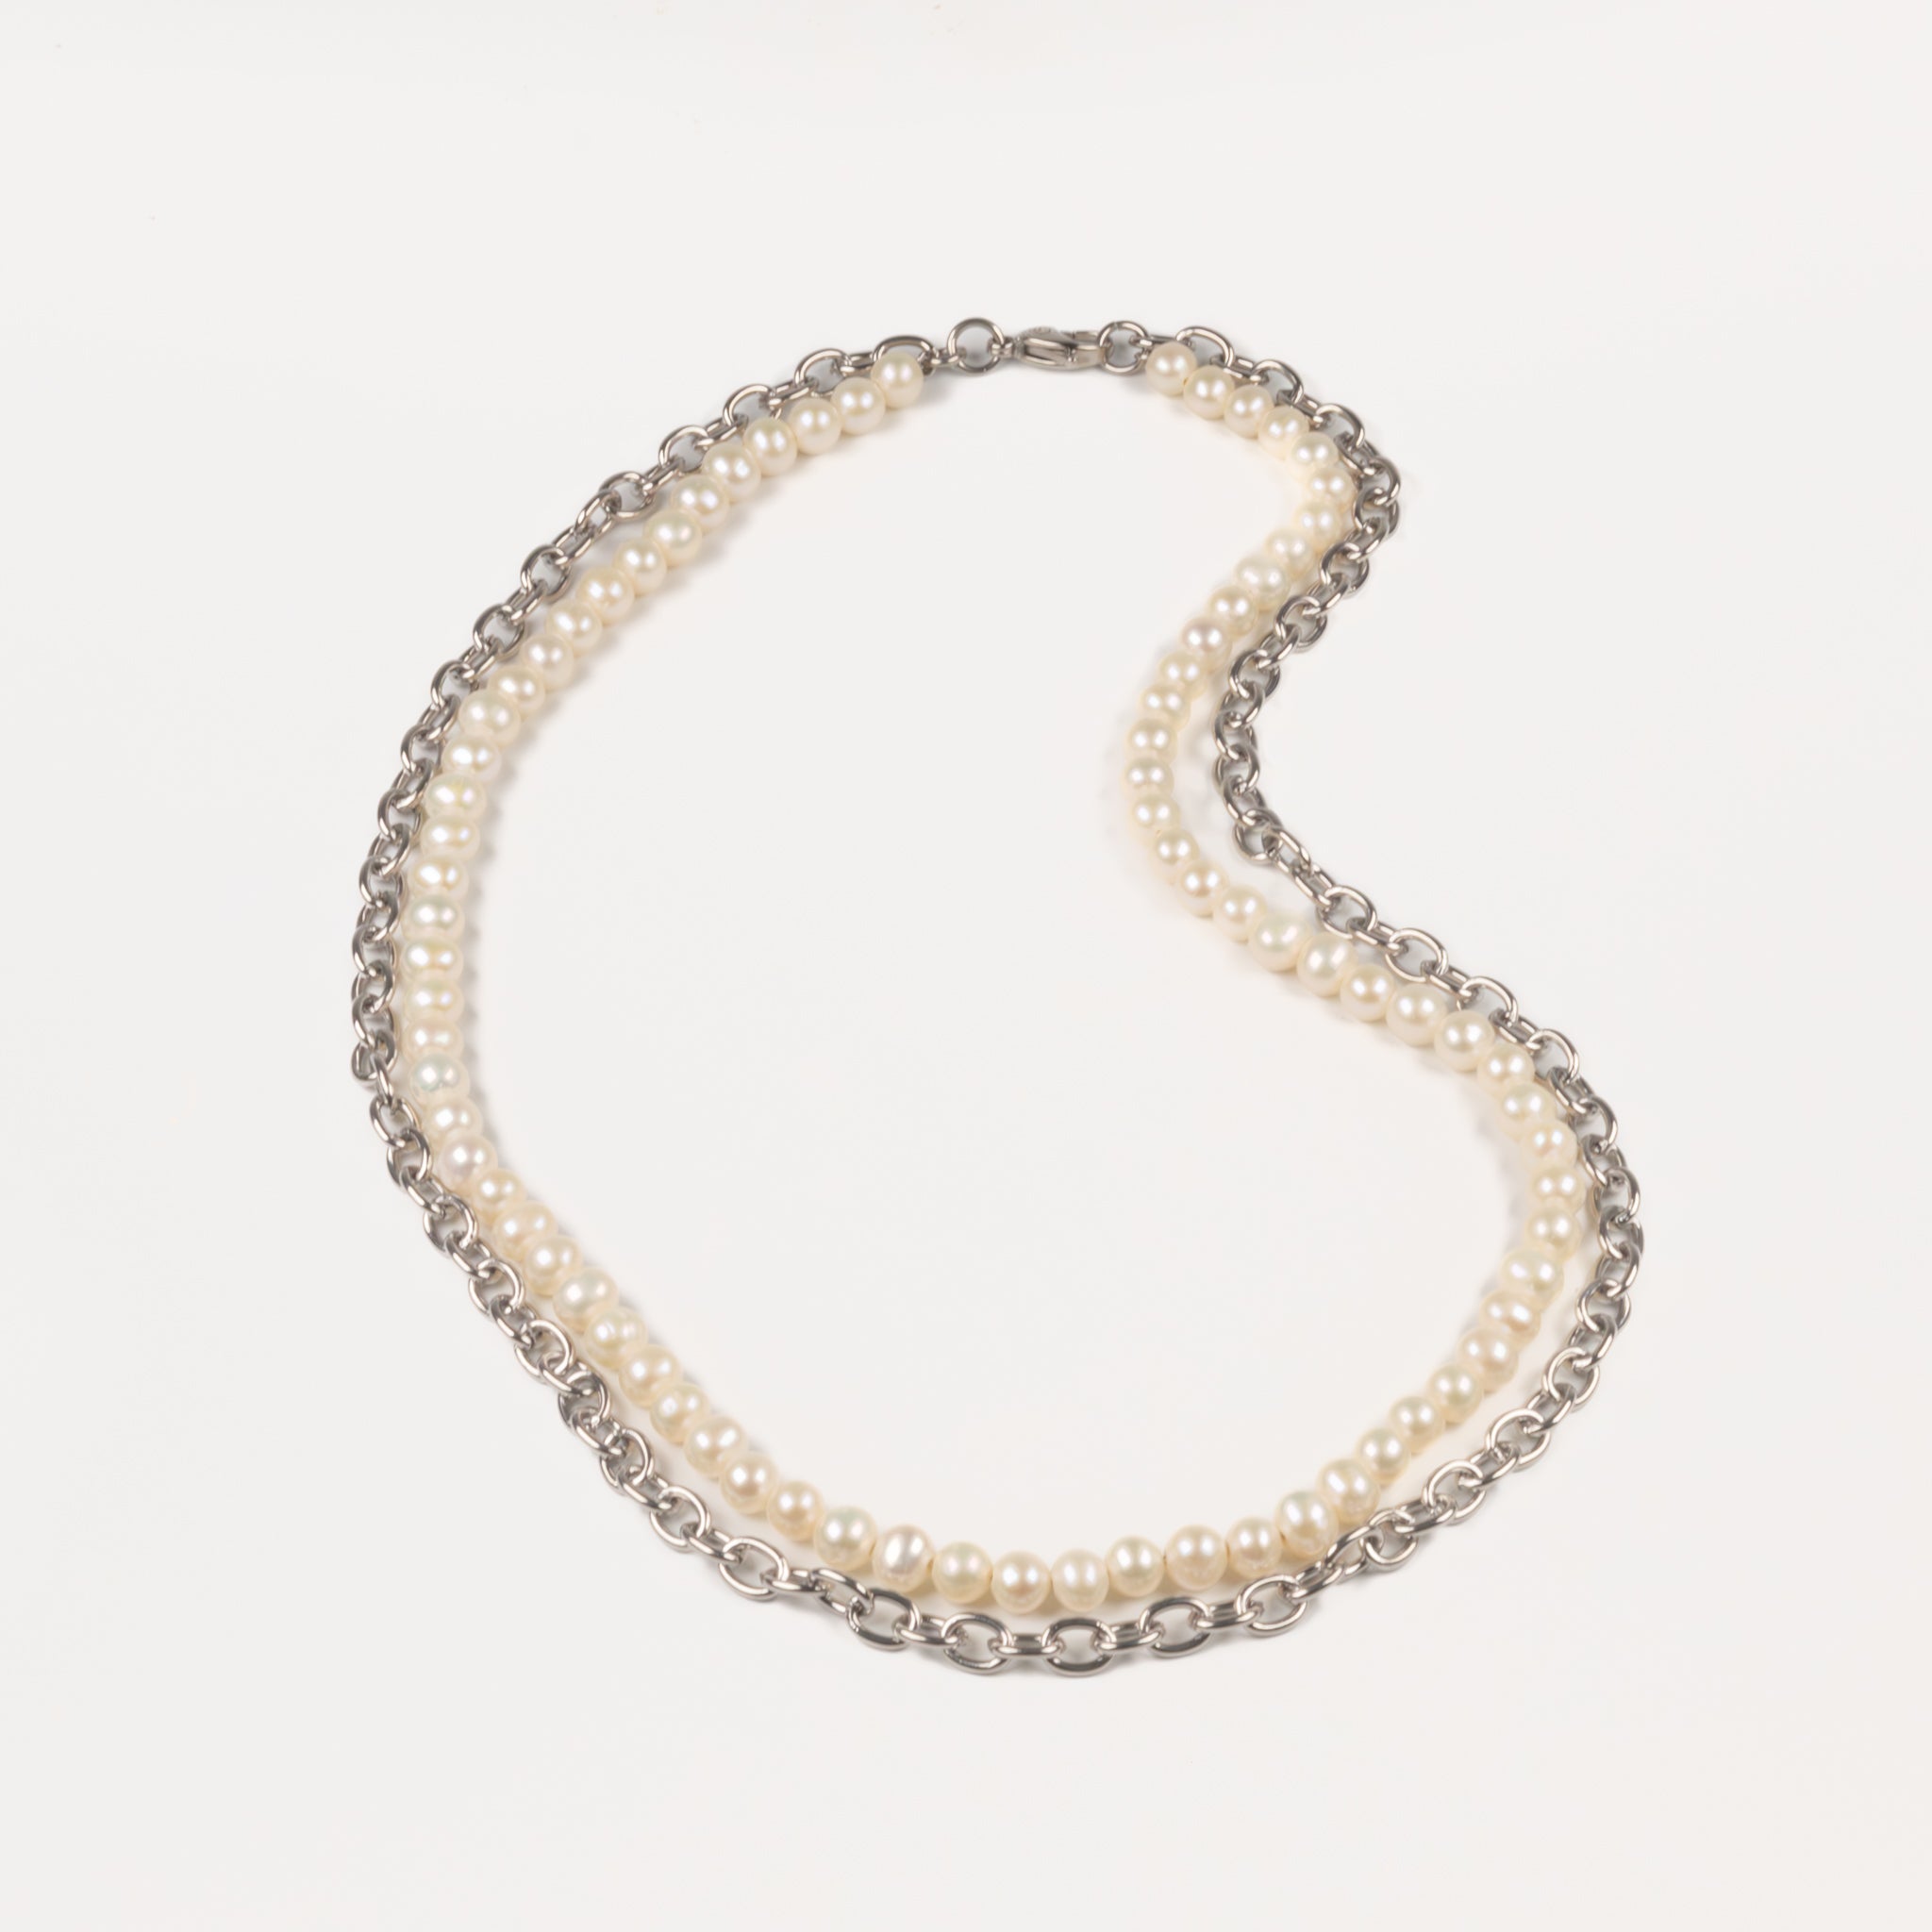 Stainless Steel and White Freshwater Pearl Double Link Necklace